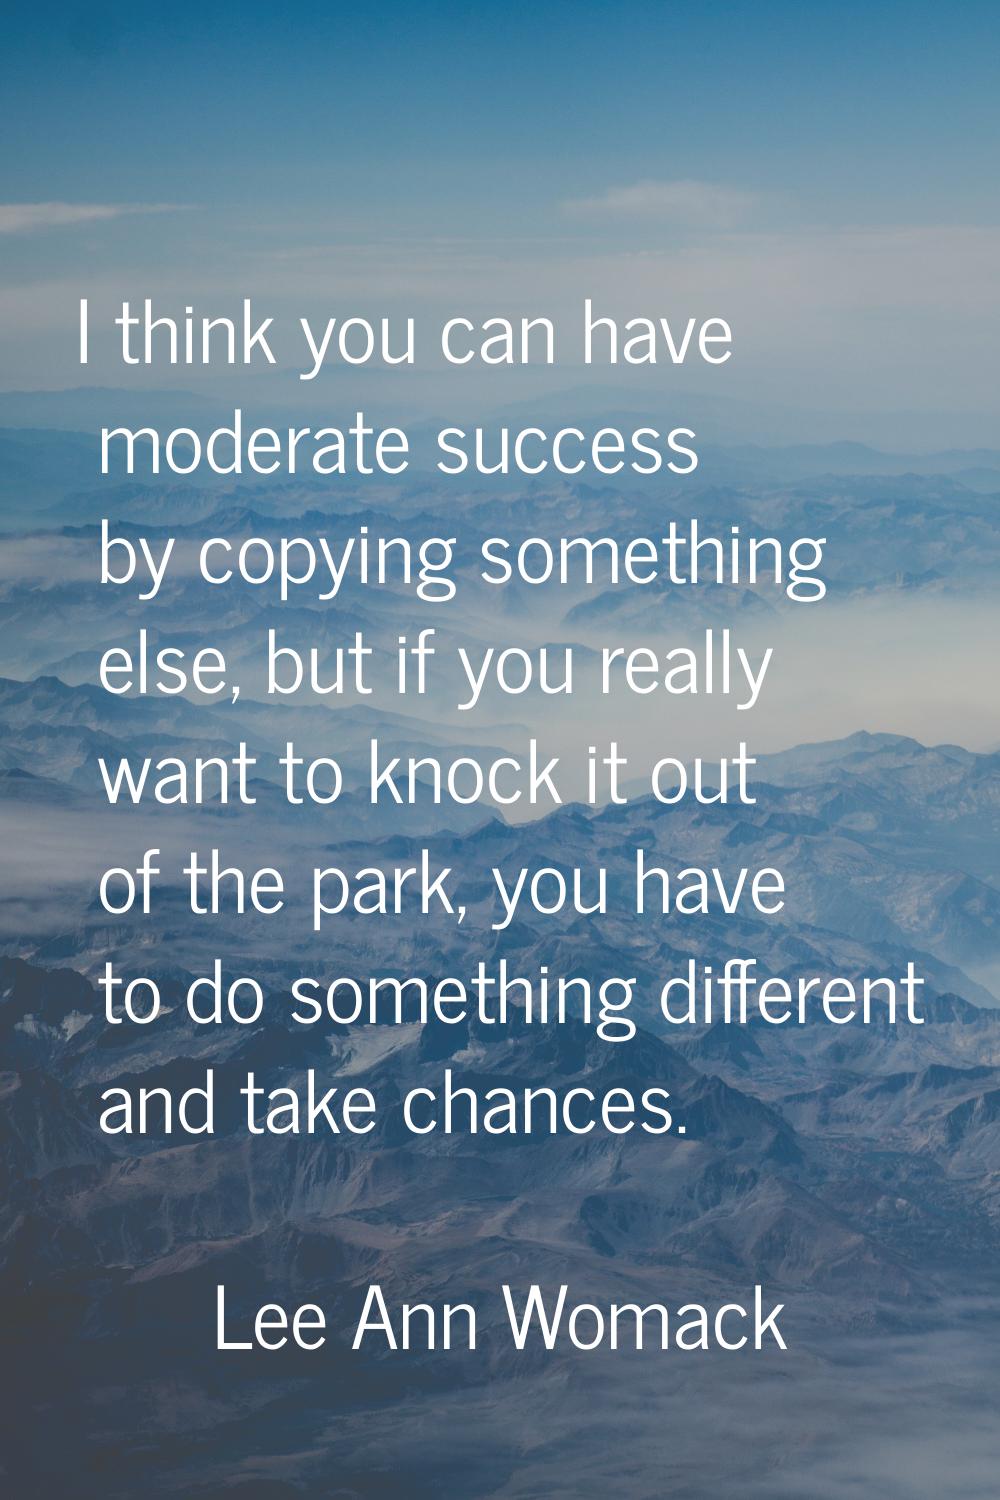 I think you can have moderate success by copying something else, but if you really want to knock it